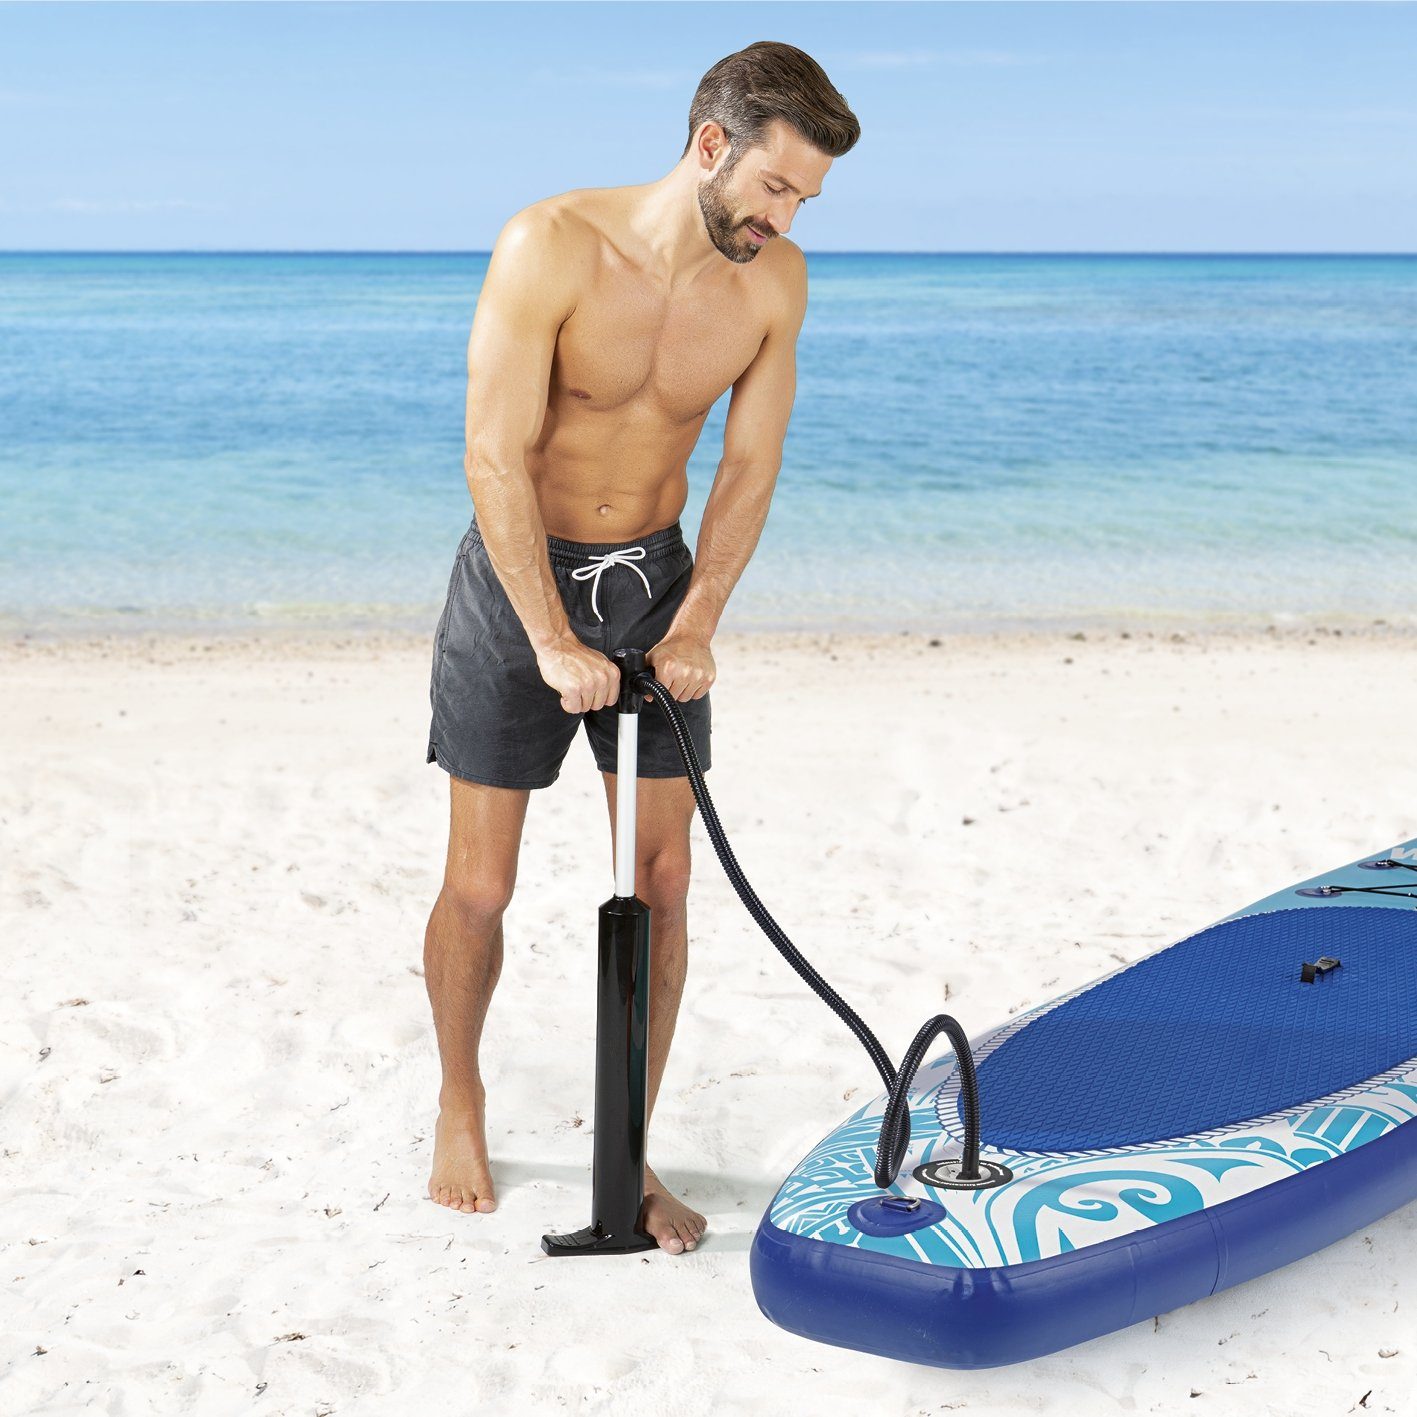 Board cm, Komplett Paddle-Board 110kg, Board SUP-Board, blau/türkis Paddel Stand Paddling inkl. Inflatable Set SUP Paddle Stand-Up 300 up MAXXMEE